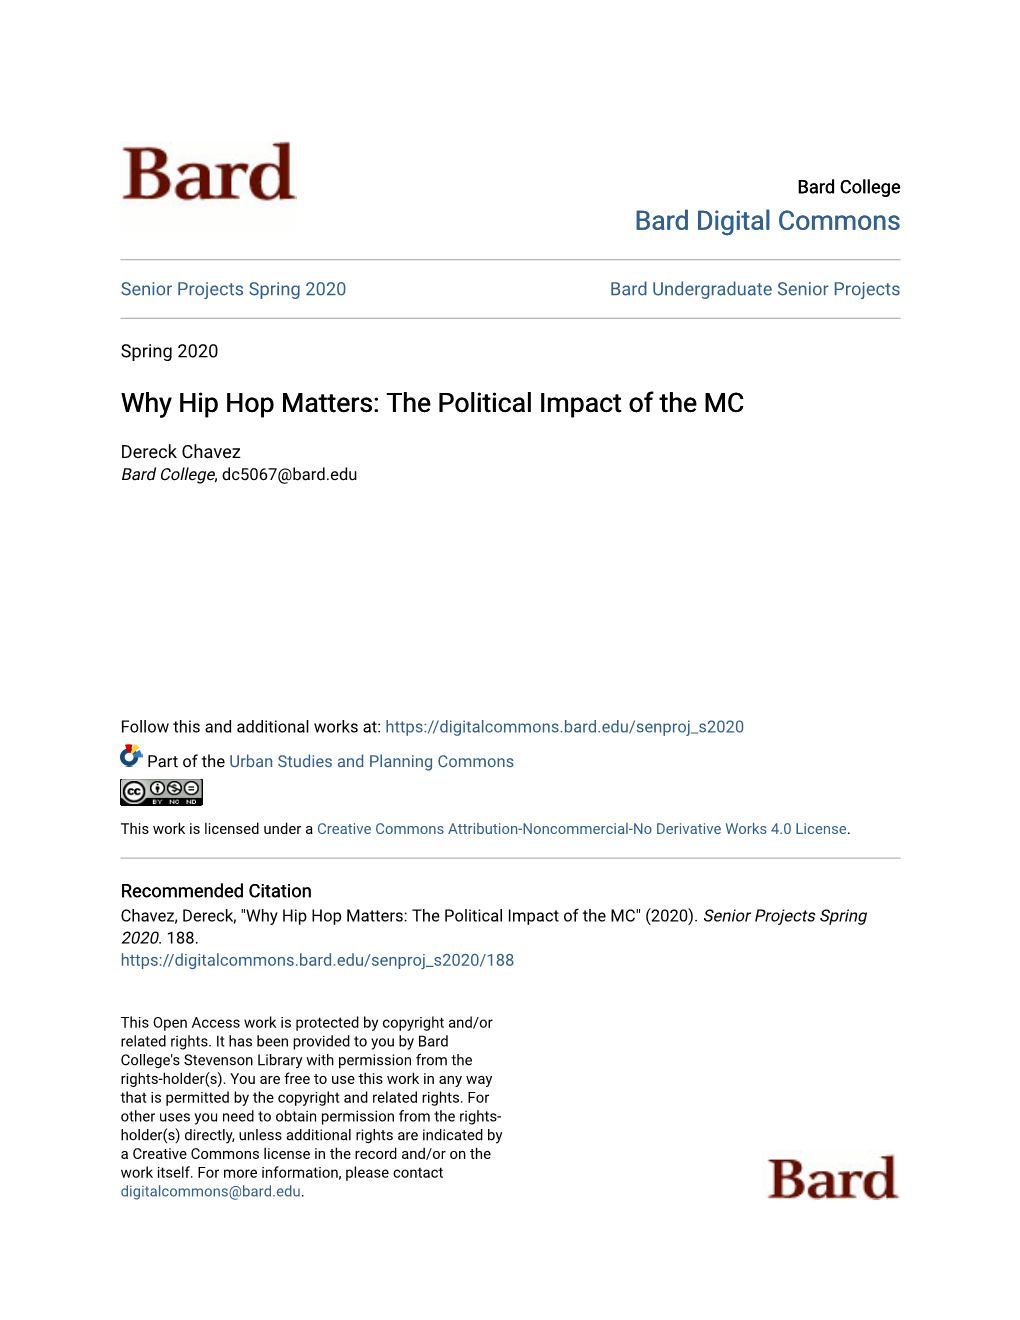 Why Hip Hop Matters: the Political Impact of the MC